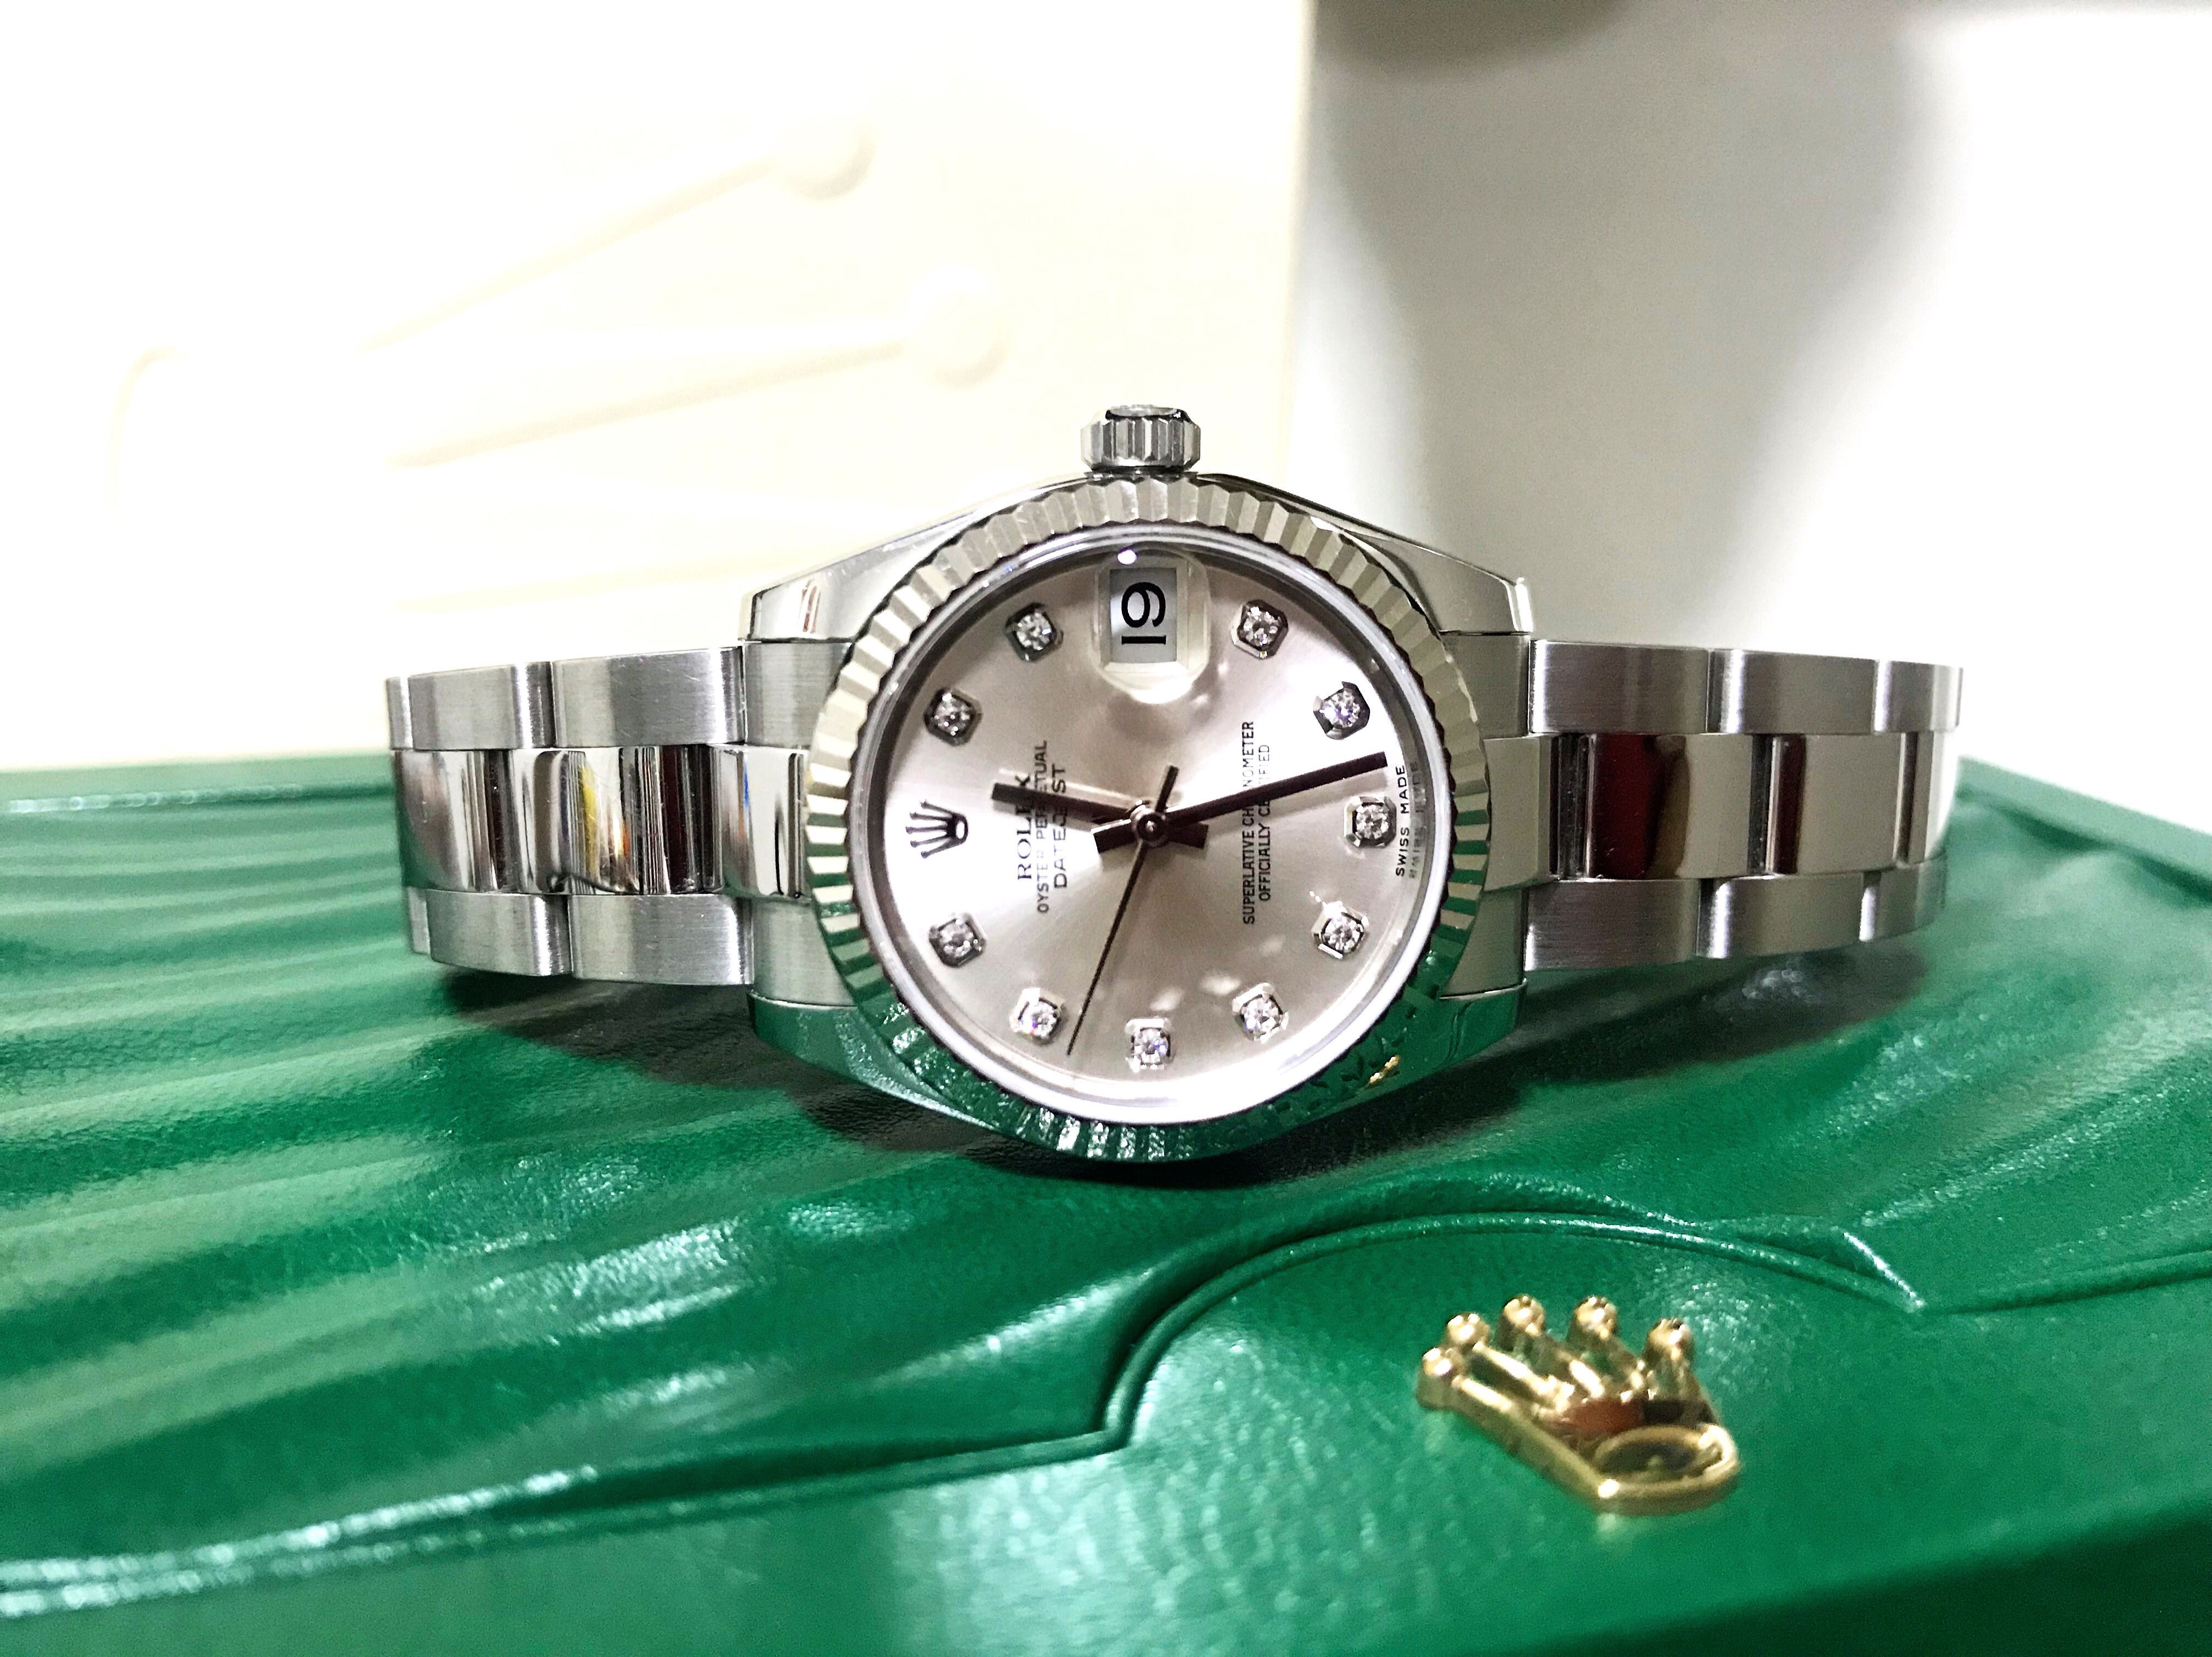 datejust 31 oystersteel and white gold